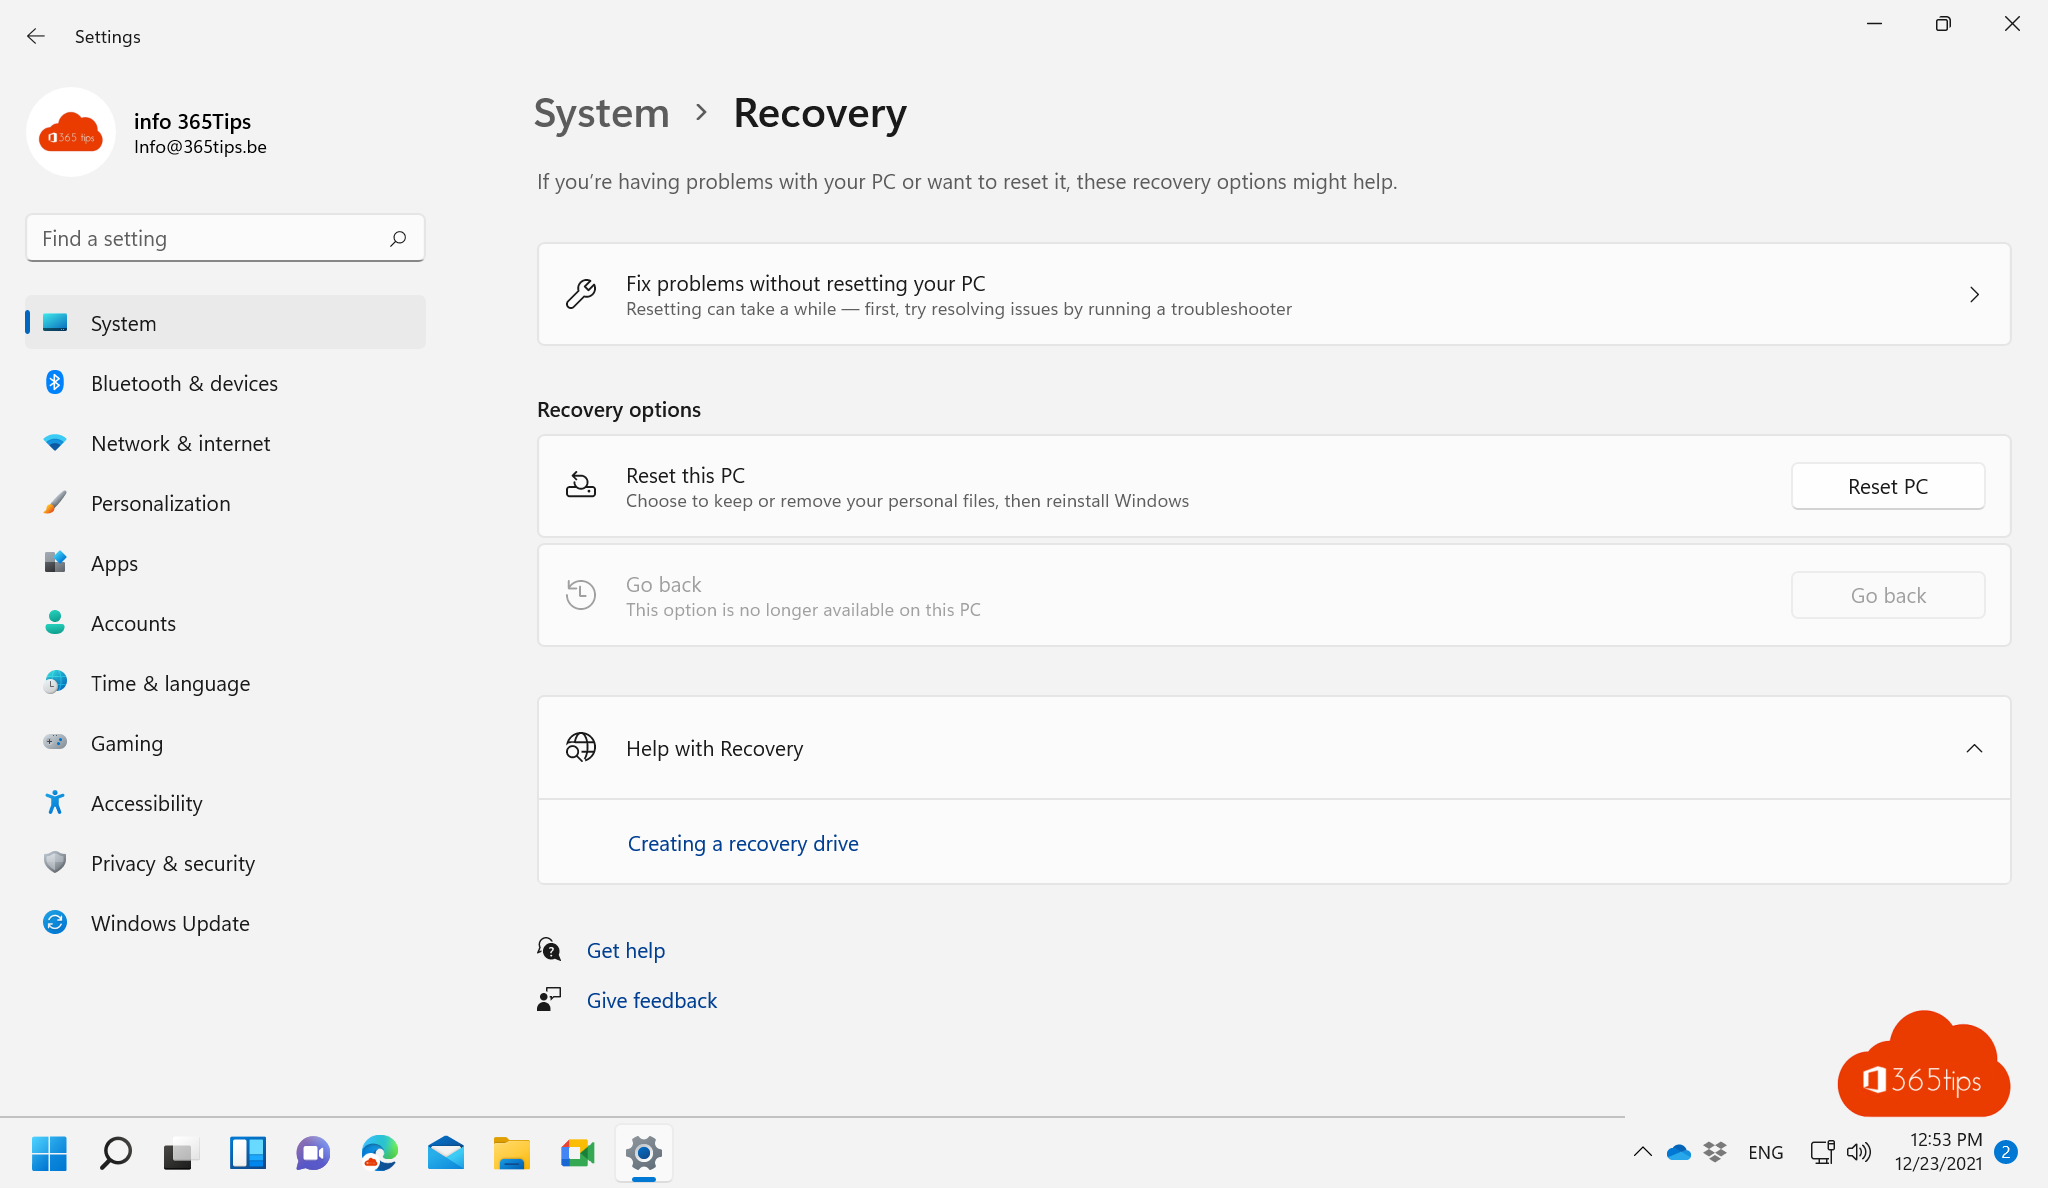 How to restore a PC with Windows 11 to factory settings?